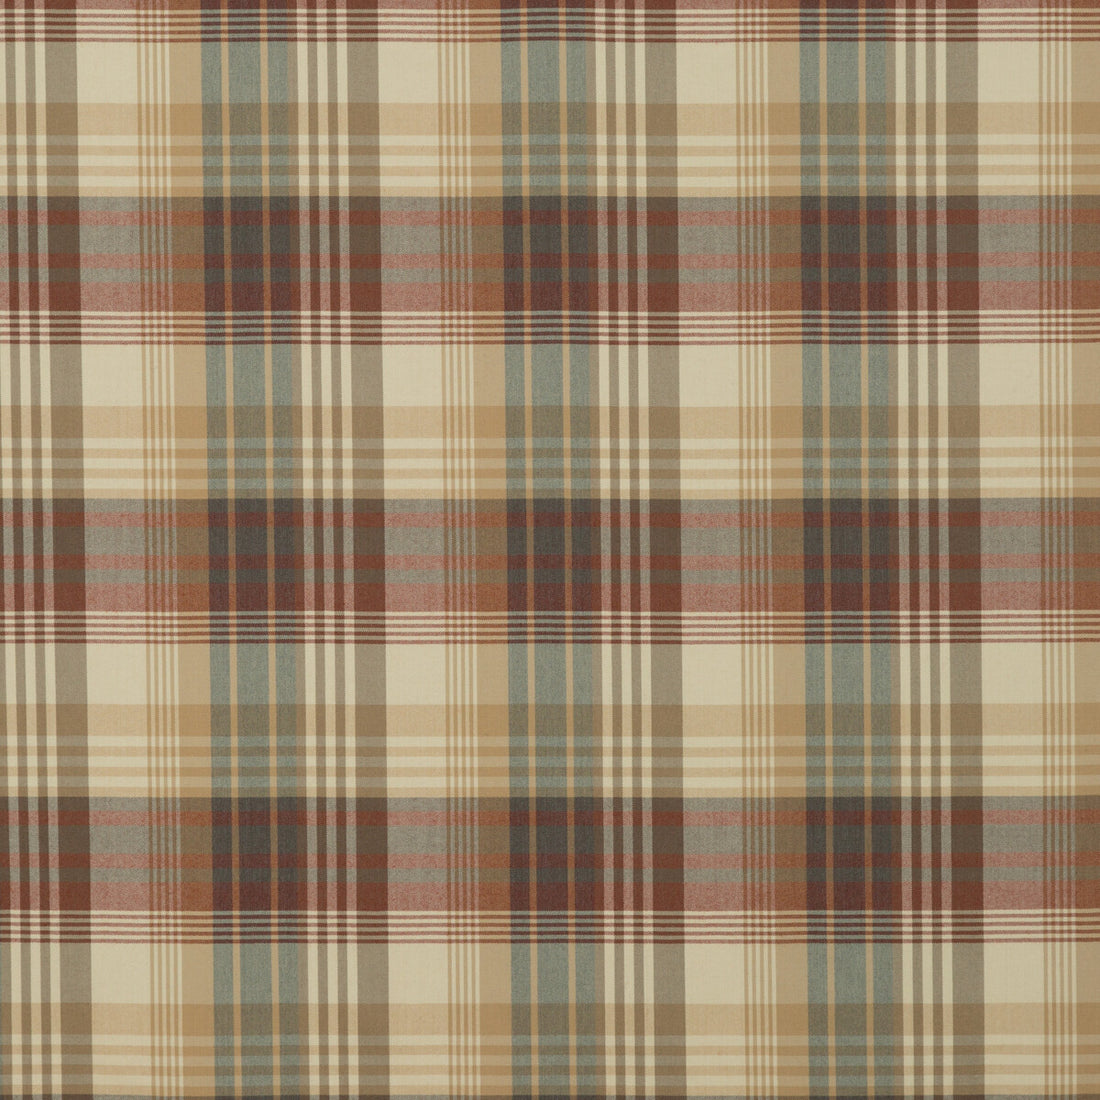 Ancient Tartan fabric in red/charcoal color - pattern FD016/584.V78.0 - by Mulberry in the Grand Tour collection